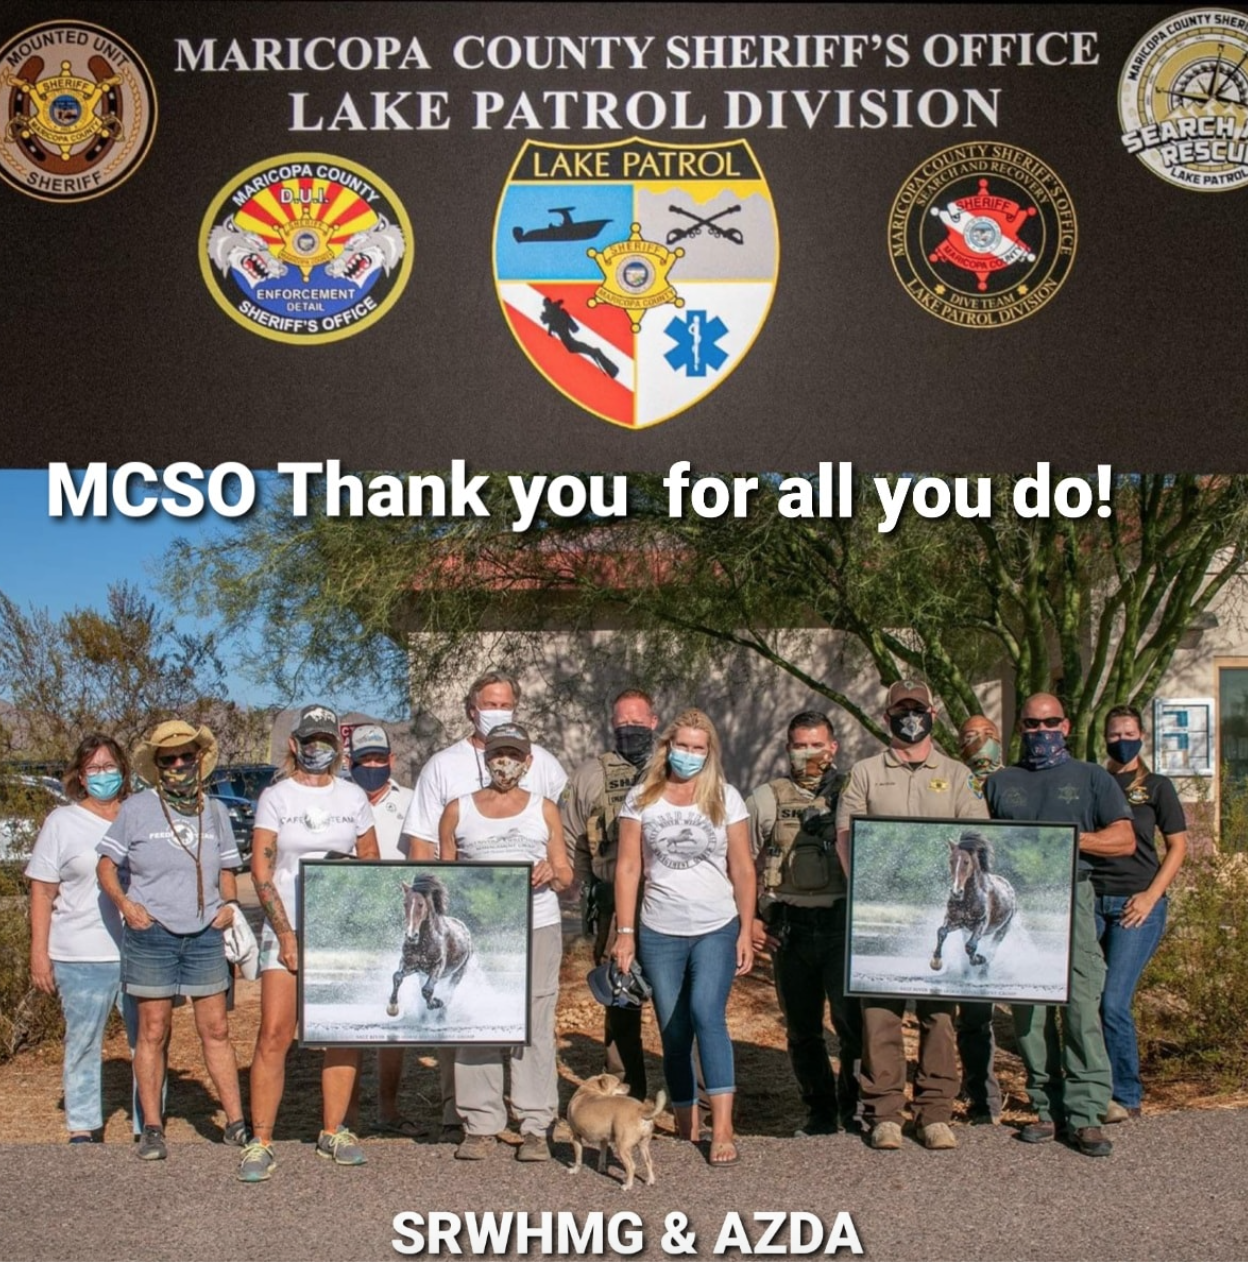 As a small token of our appreciation for  MCSO Lake Patrol we presented two framed canvases to the office